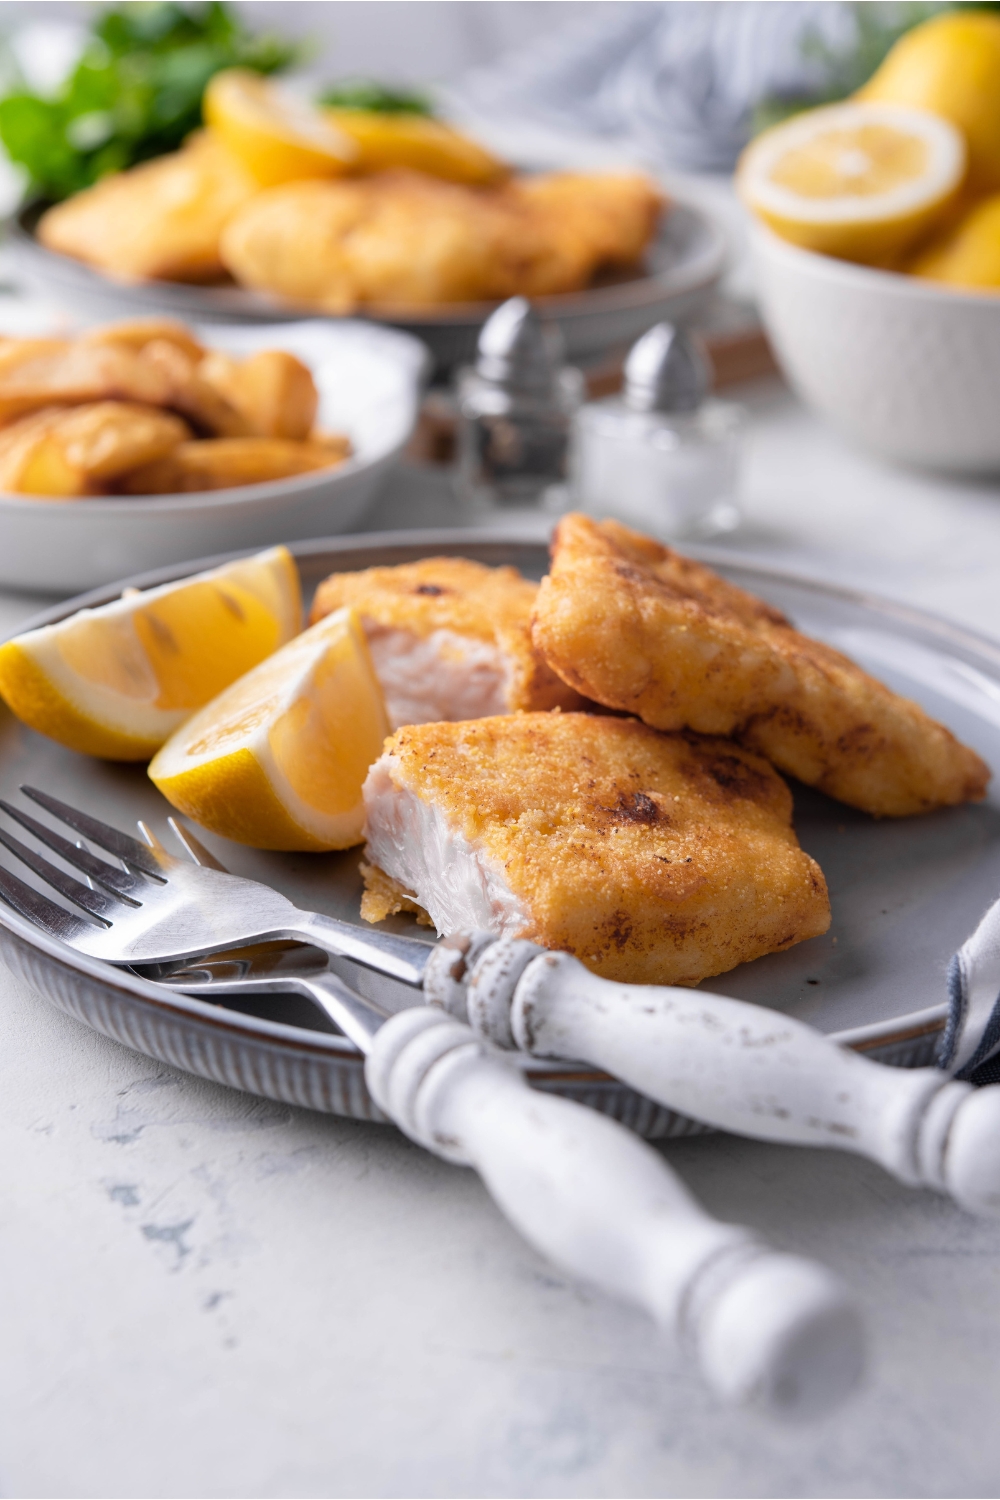 Fried grouper fillets sliced in half and piled on top of each other. The fish is on a blue plate alongside a set of silverware and two lemon wedges. In the background are plates of more fried fish and lemons.